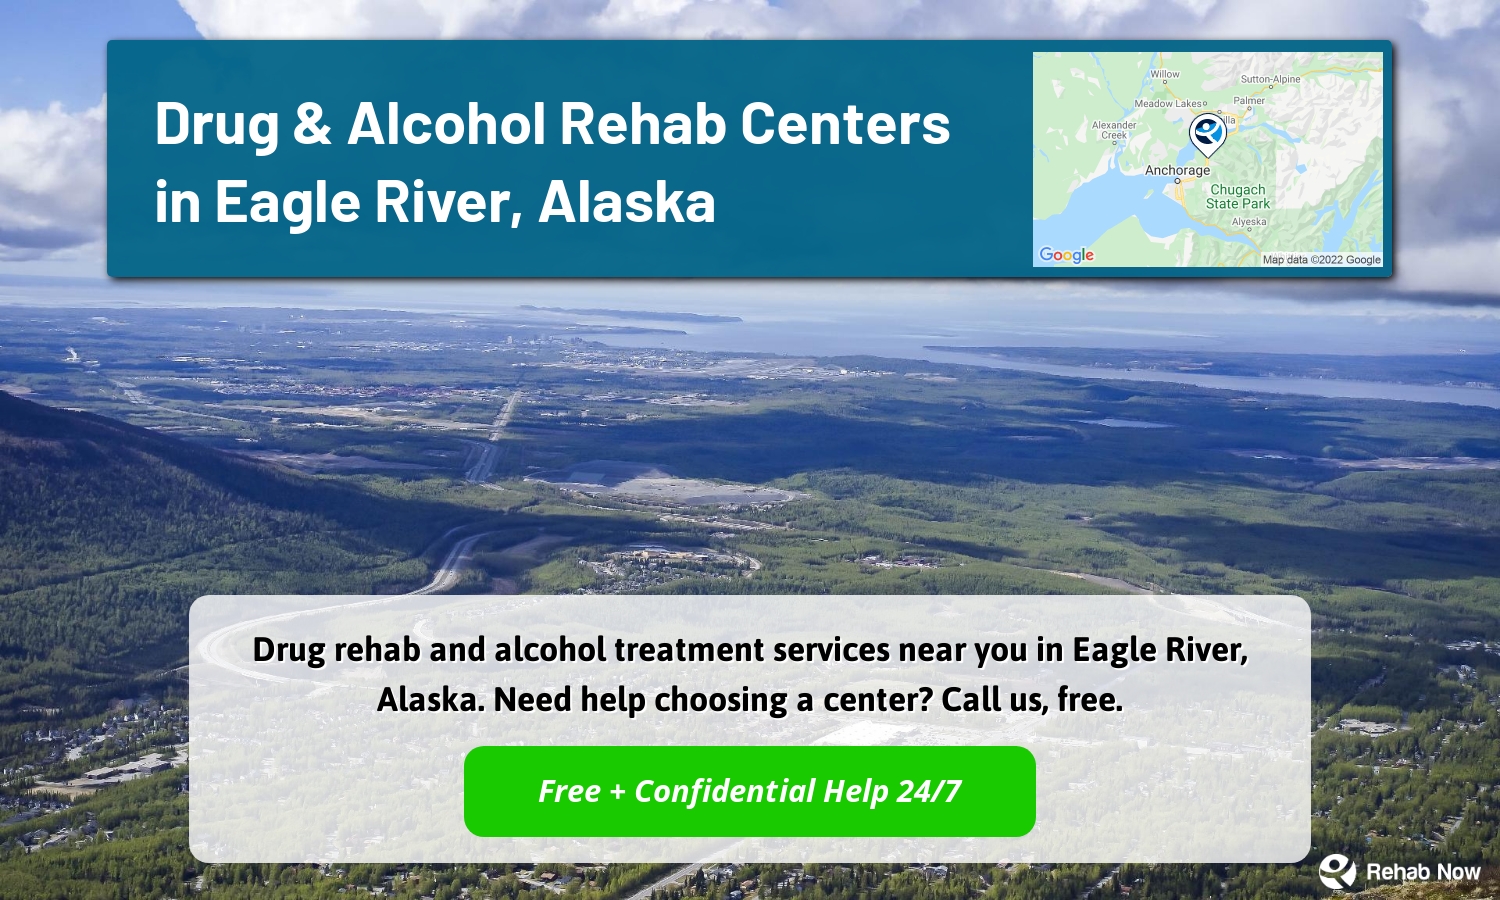 Drug rehab and alcohol treatment services near you in Eagle River, Alaska. Need help choosing a center? Call us, free.